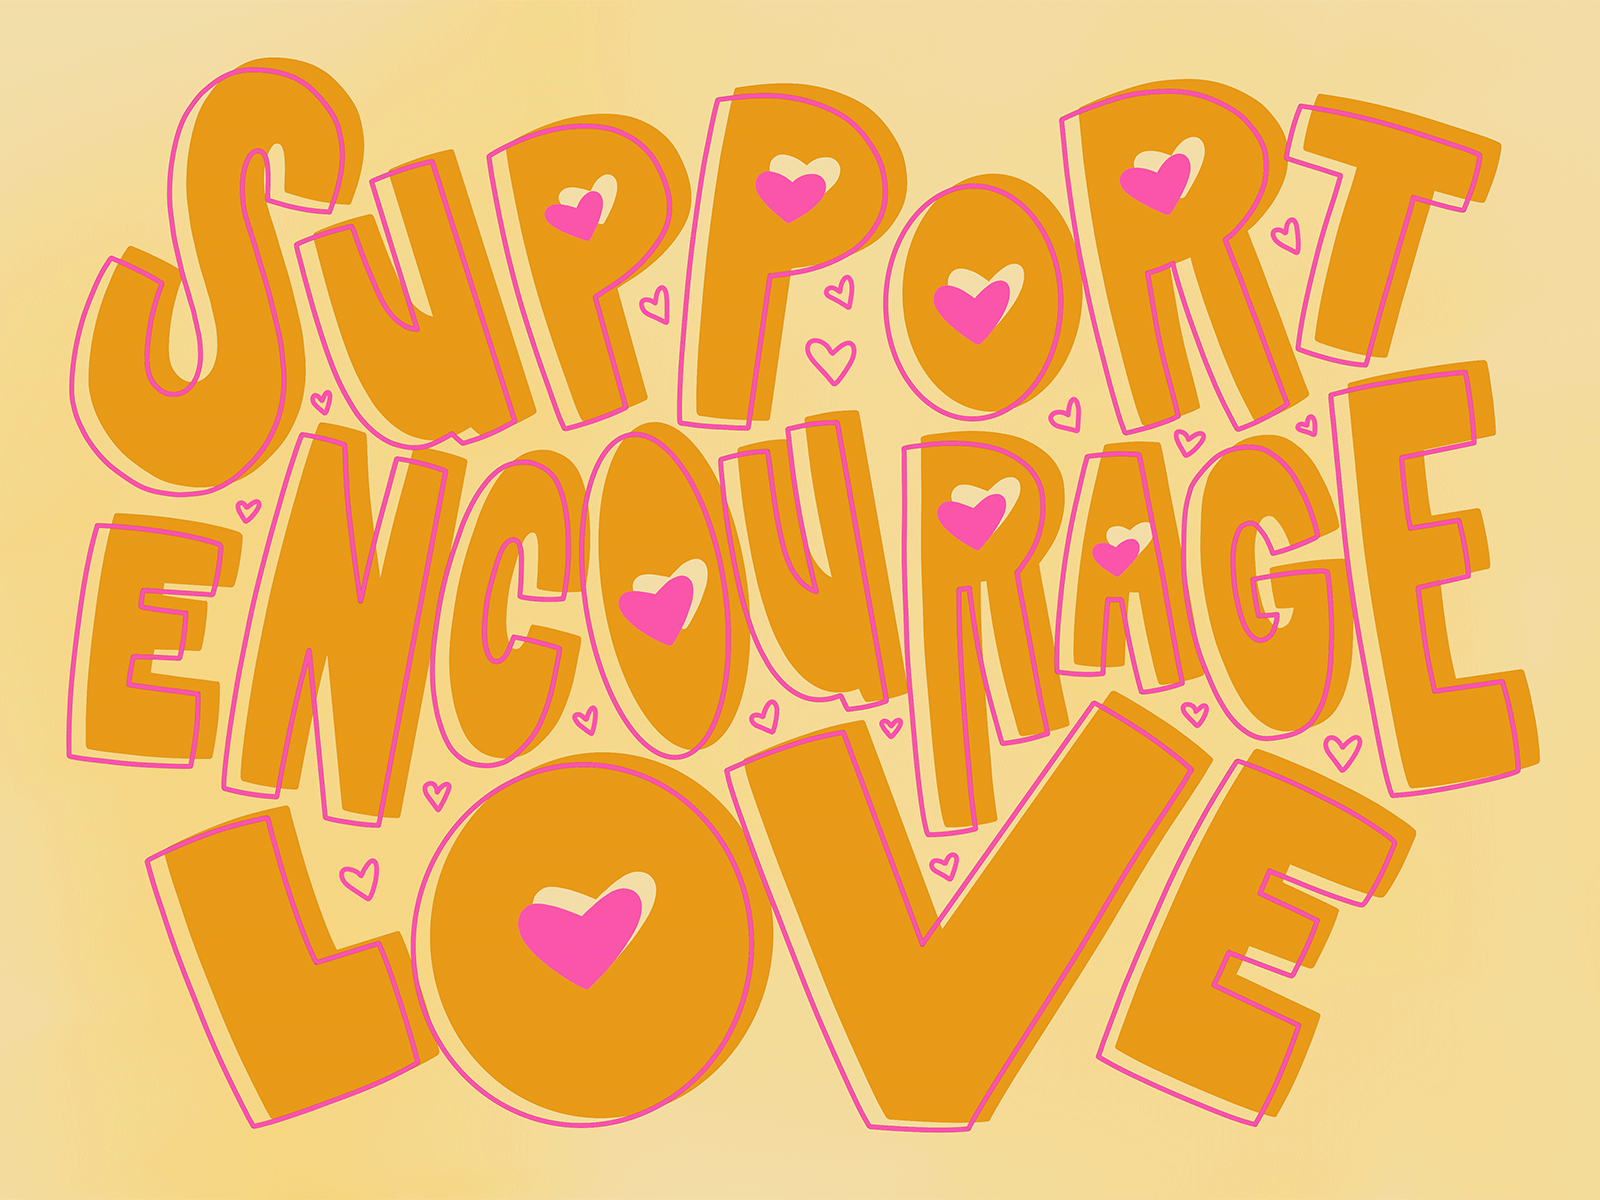 Support Encourage Love camiah hand drawn hand drawn heart illustration lettering